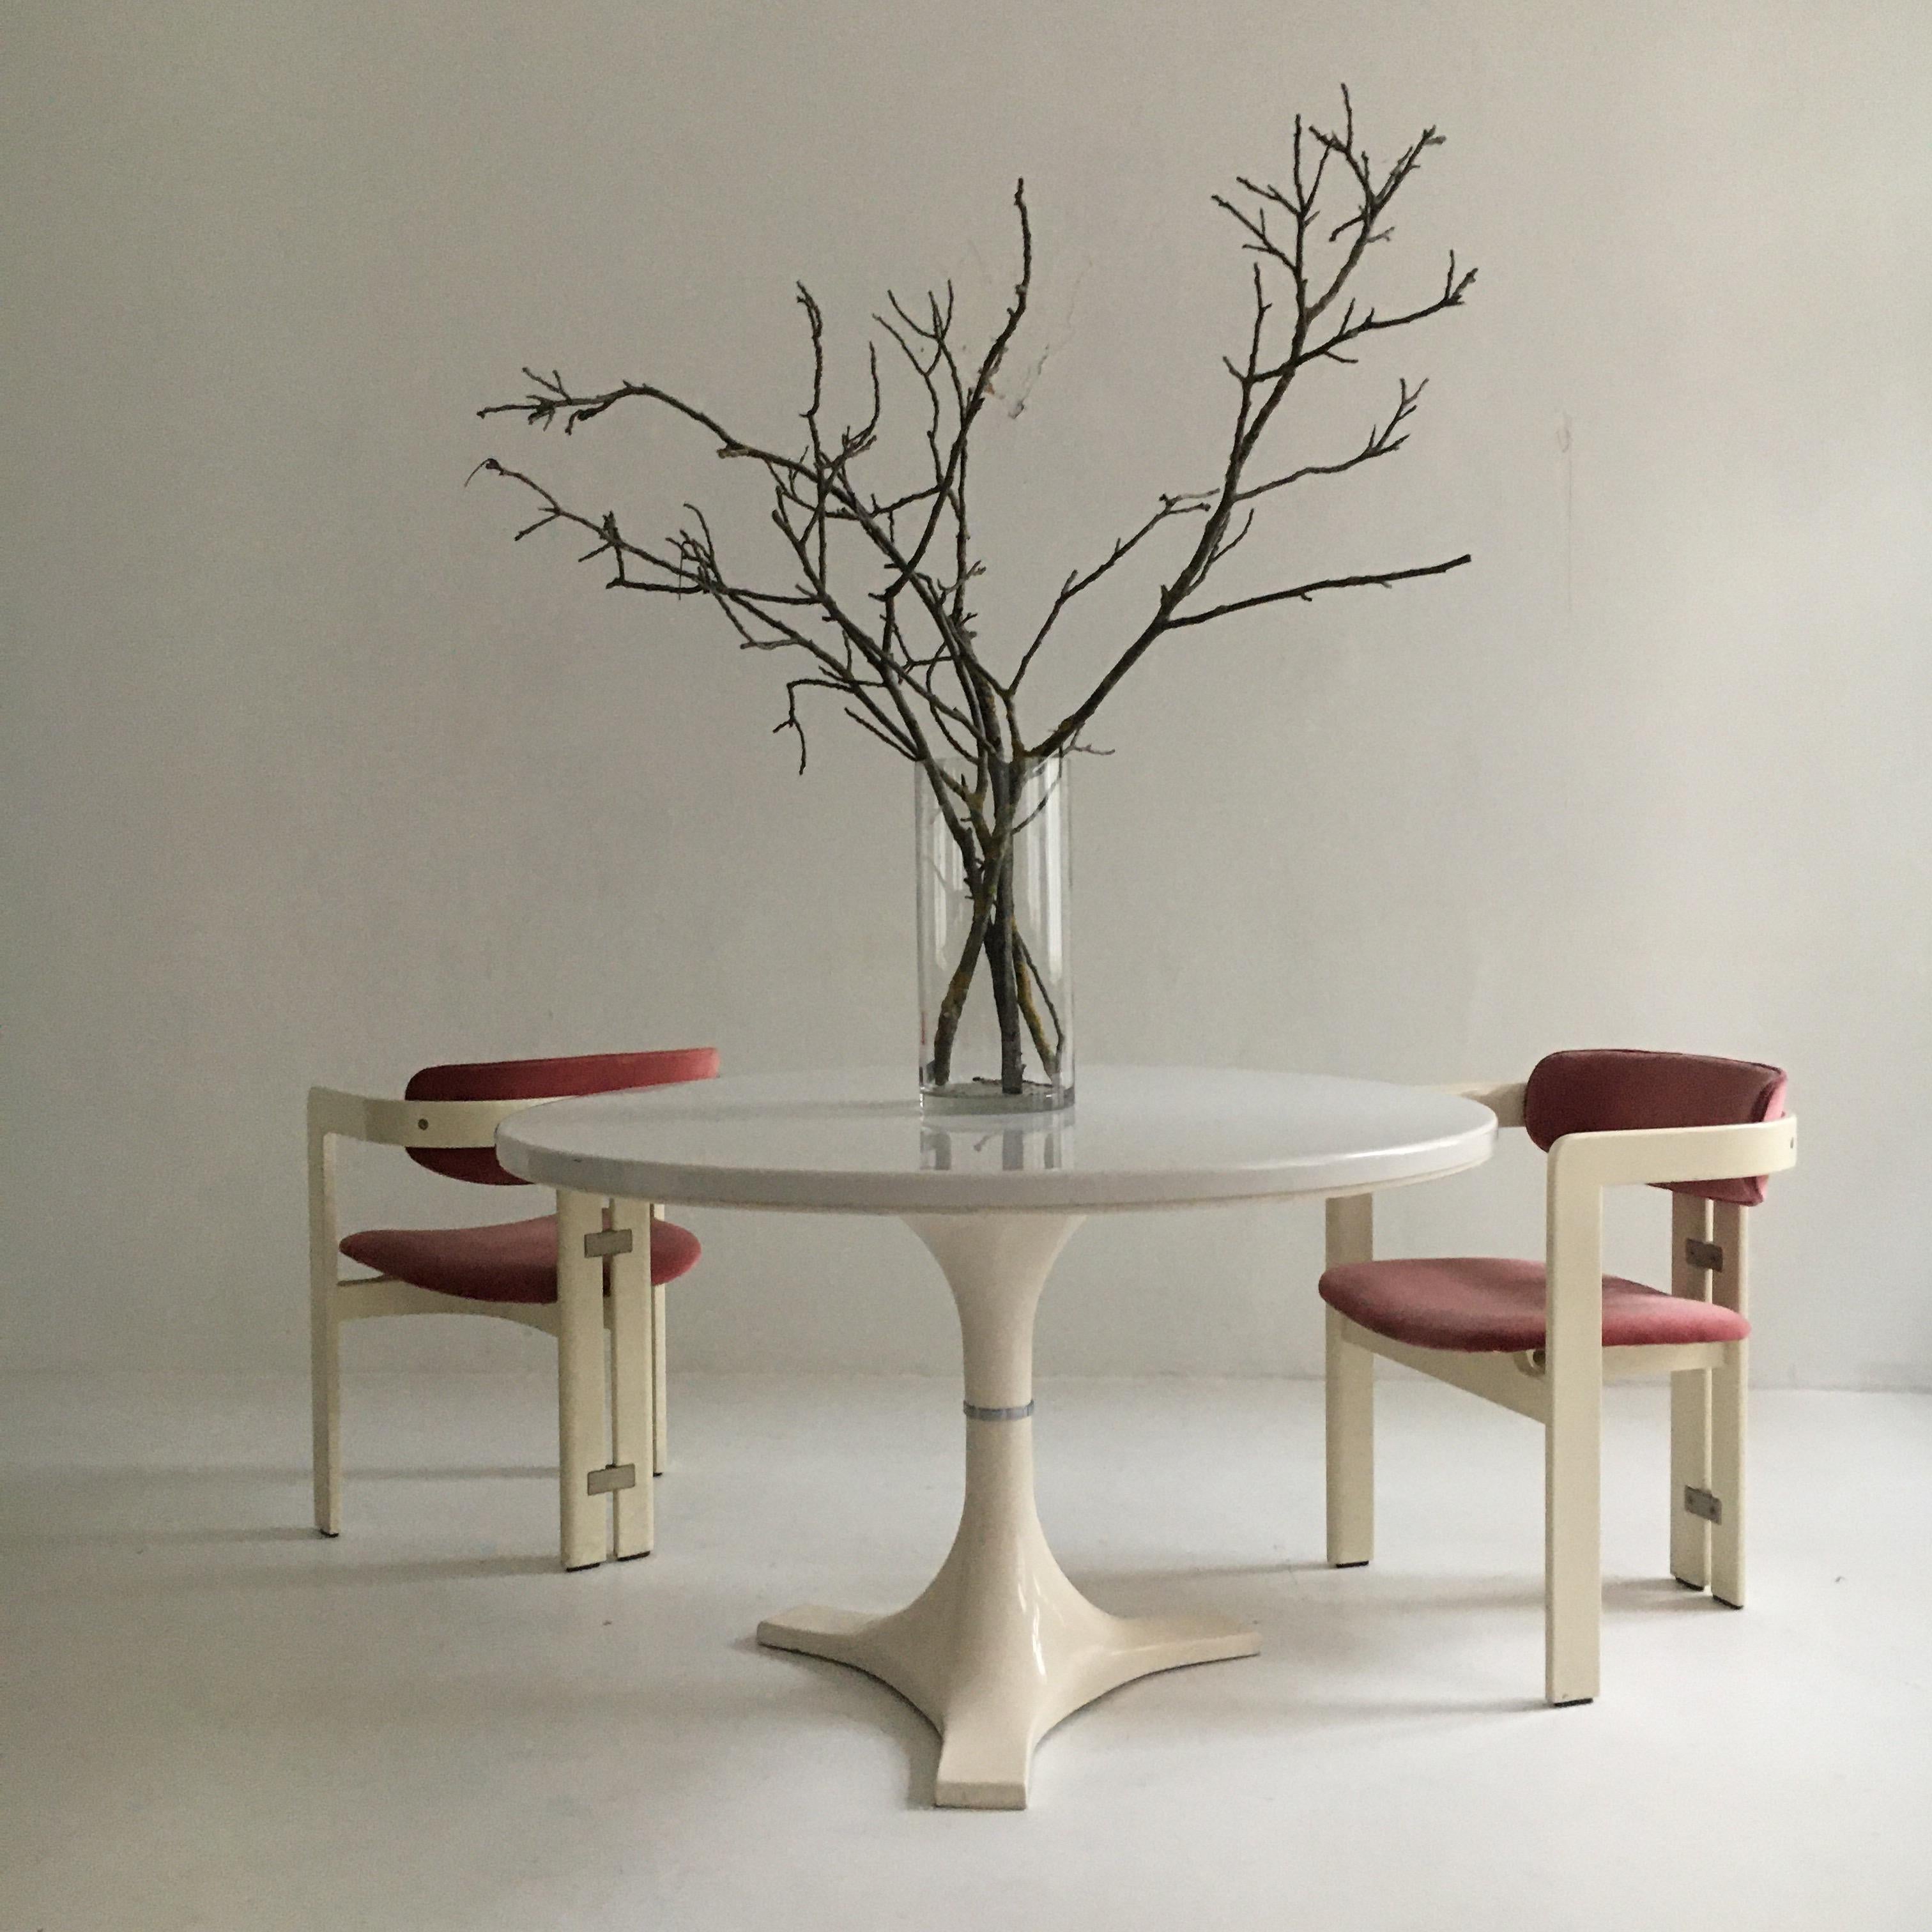 Metal Dining Table by Anna Castelli Ferrieri, Ignazio Gardella for Kartell, Italy 1965 For Sale